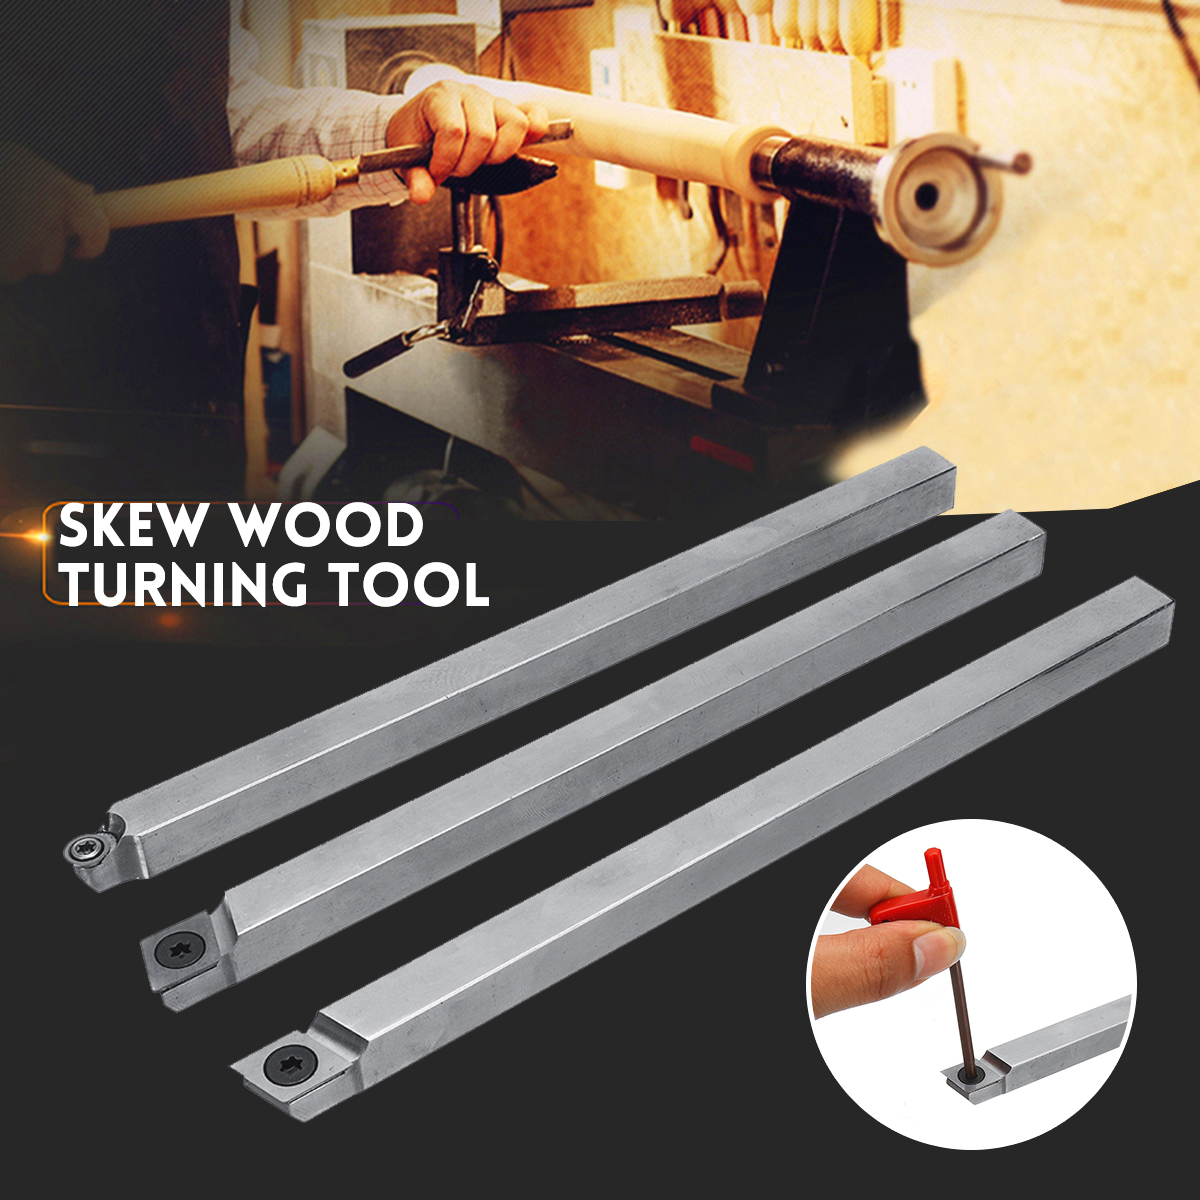 Skew-Wood-Turning-Tool-With-Wood-Carbide-Insert-Cutter-Square-Shank-Woodworking-Tool-1460977-2